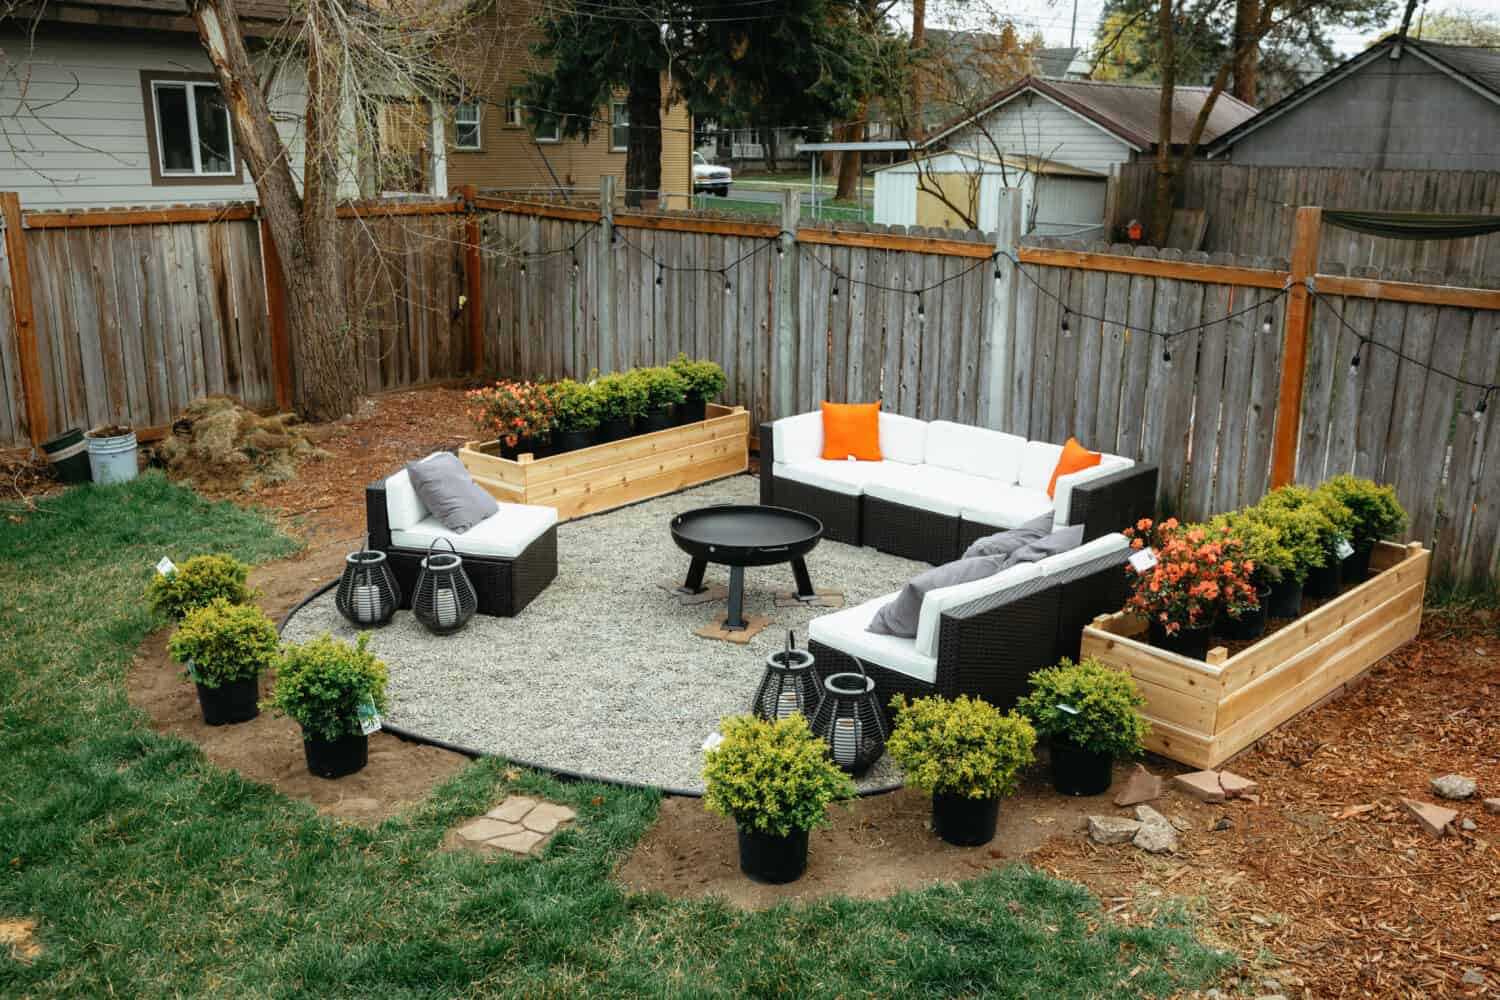 Low Budget Backyard Fire Pit, How Much Does It Cost To Build A Fire Pit In Backyard